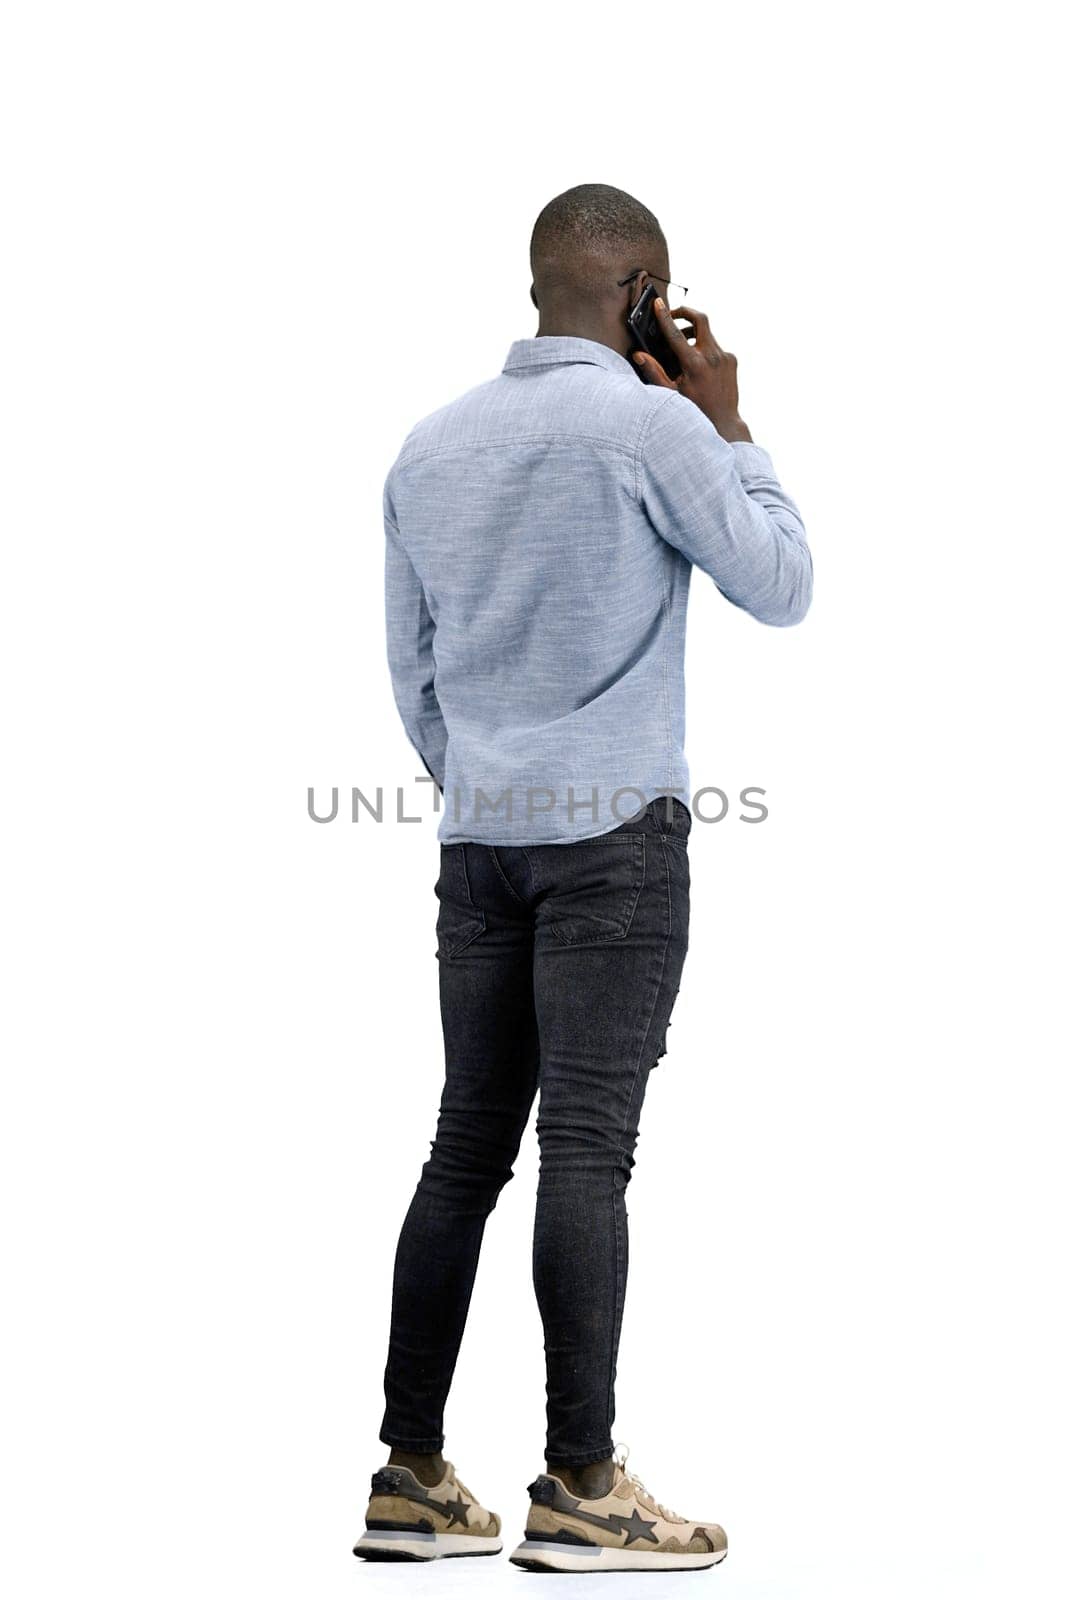 A man, full-length, on a white background, talking on the phone by Prosto